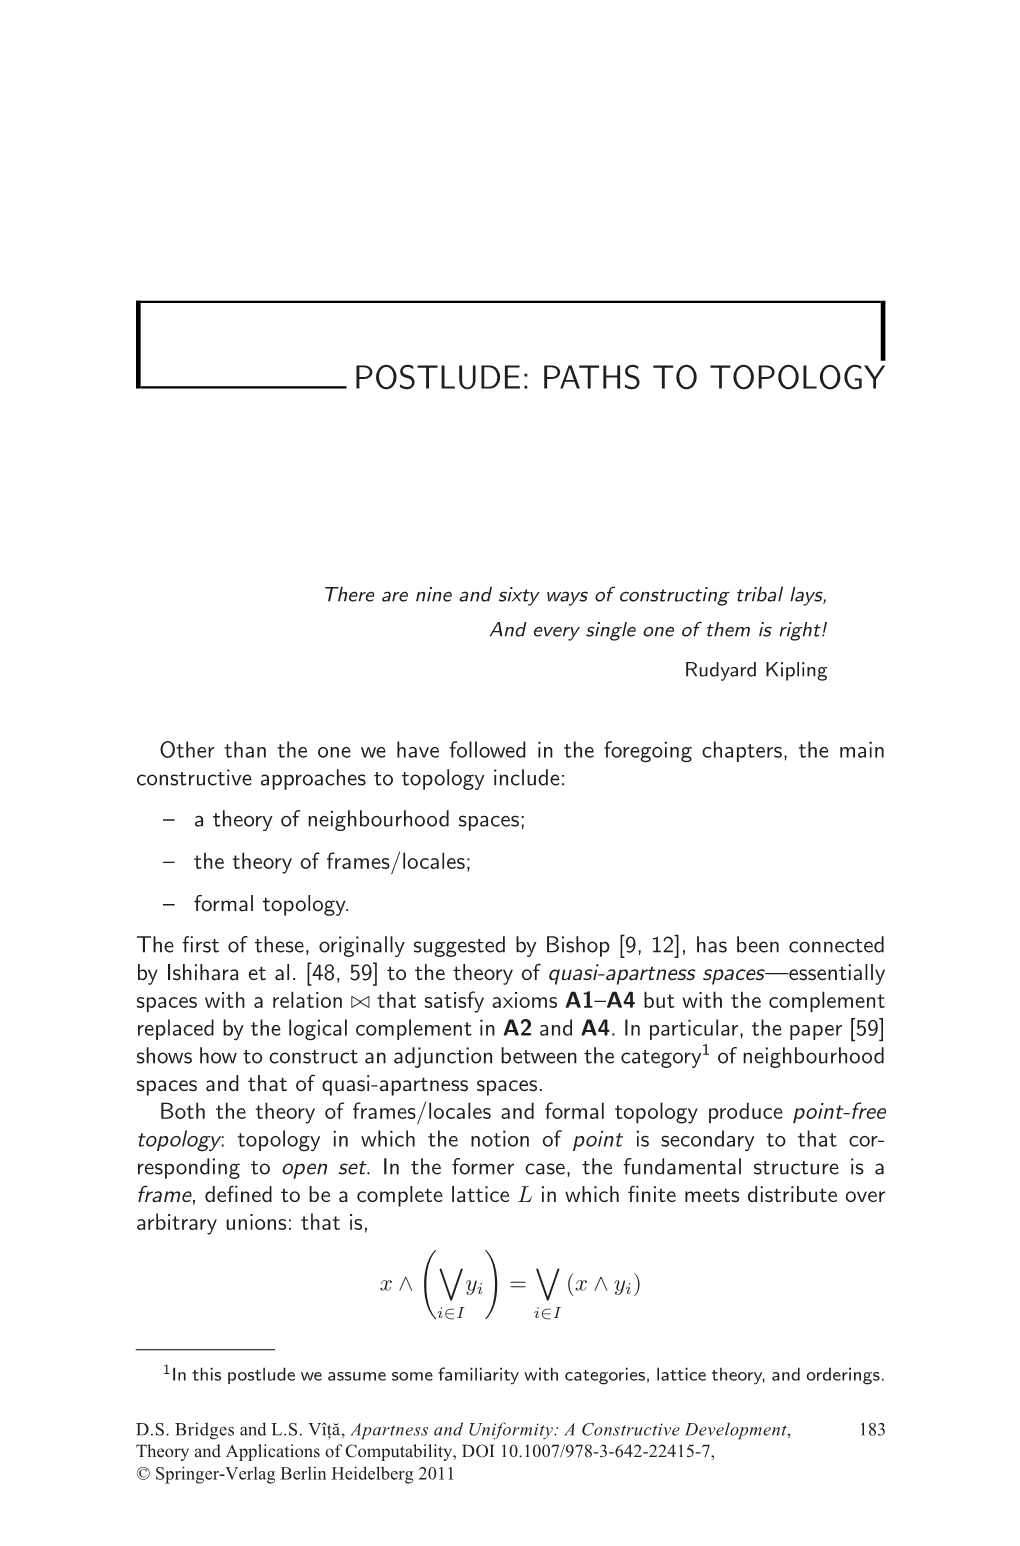 Postlude: Paths to Topology